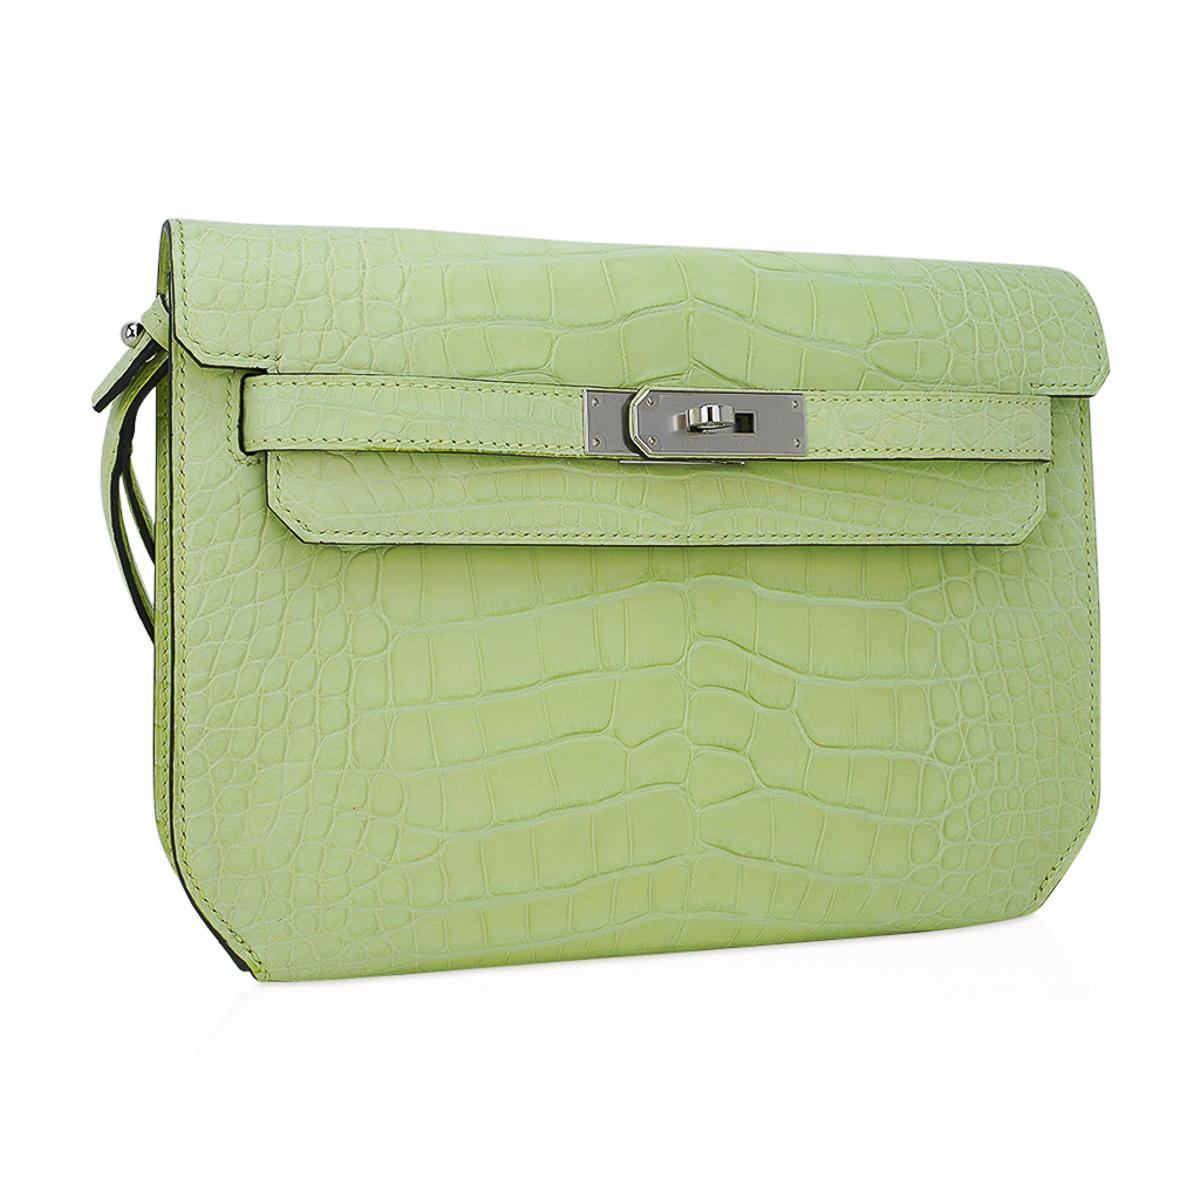 Mightychic offers a men's Hermes Kelly Depeches 25 Pouch featured in Jaune Bourgeon matte alligator.
Gorgeous light lemony unripened lime green.
This exquisite neutral bag is perfect for year round wear.
Fresh with Palladium hardware.
Pouch opens to